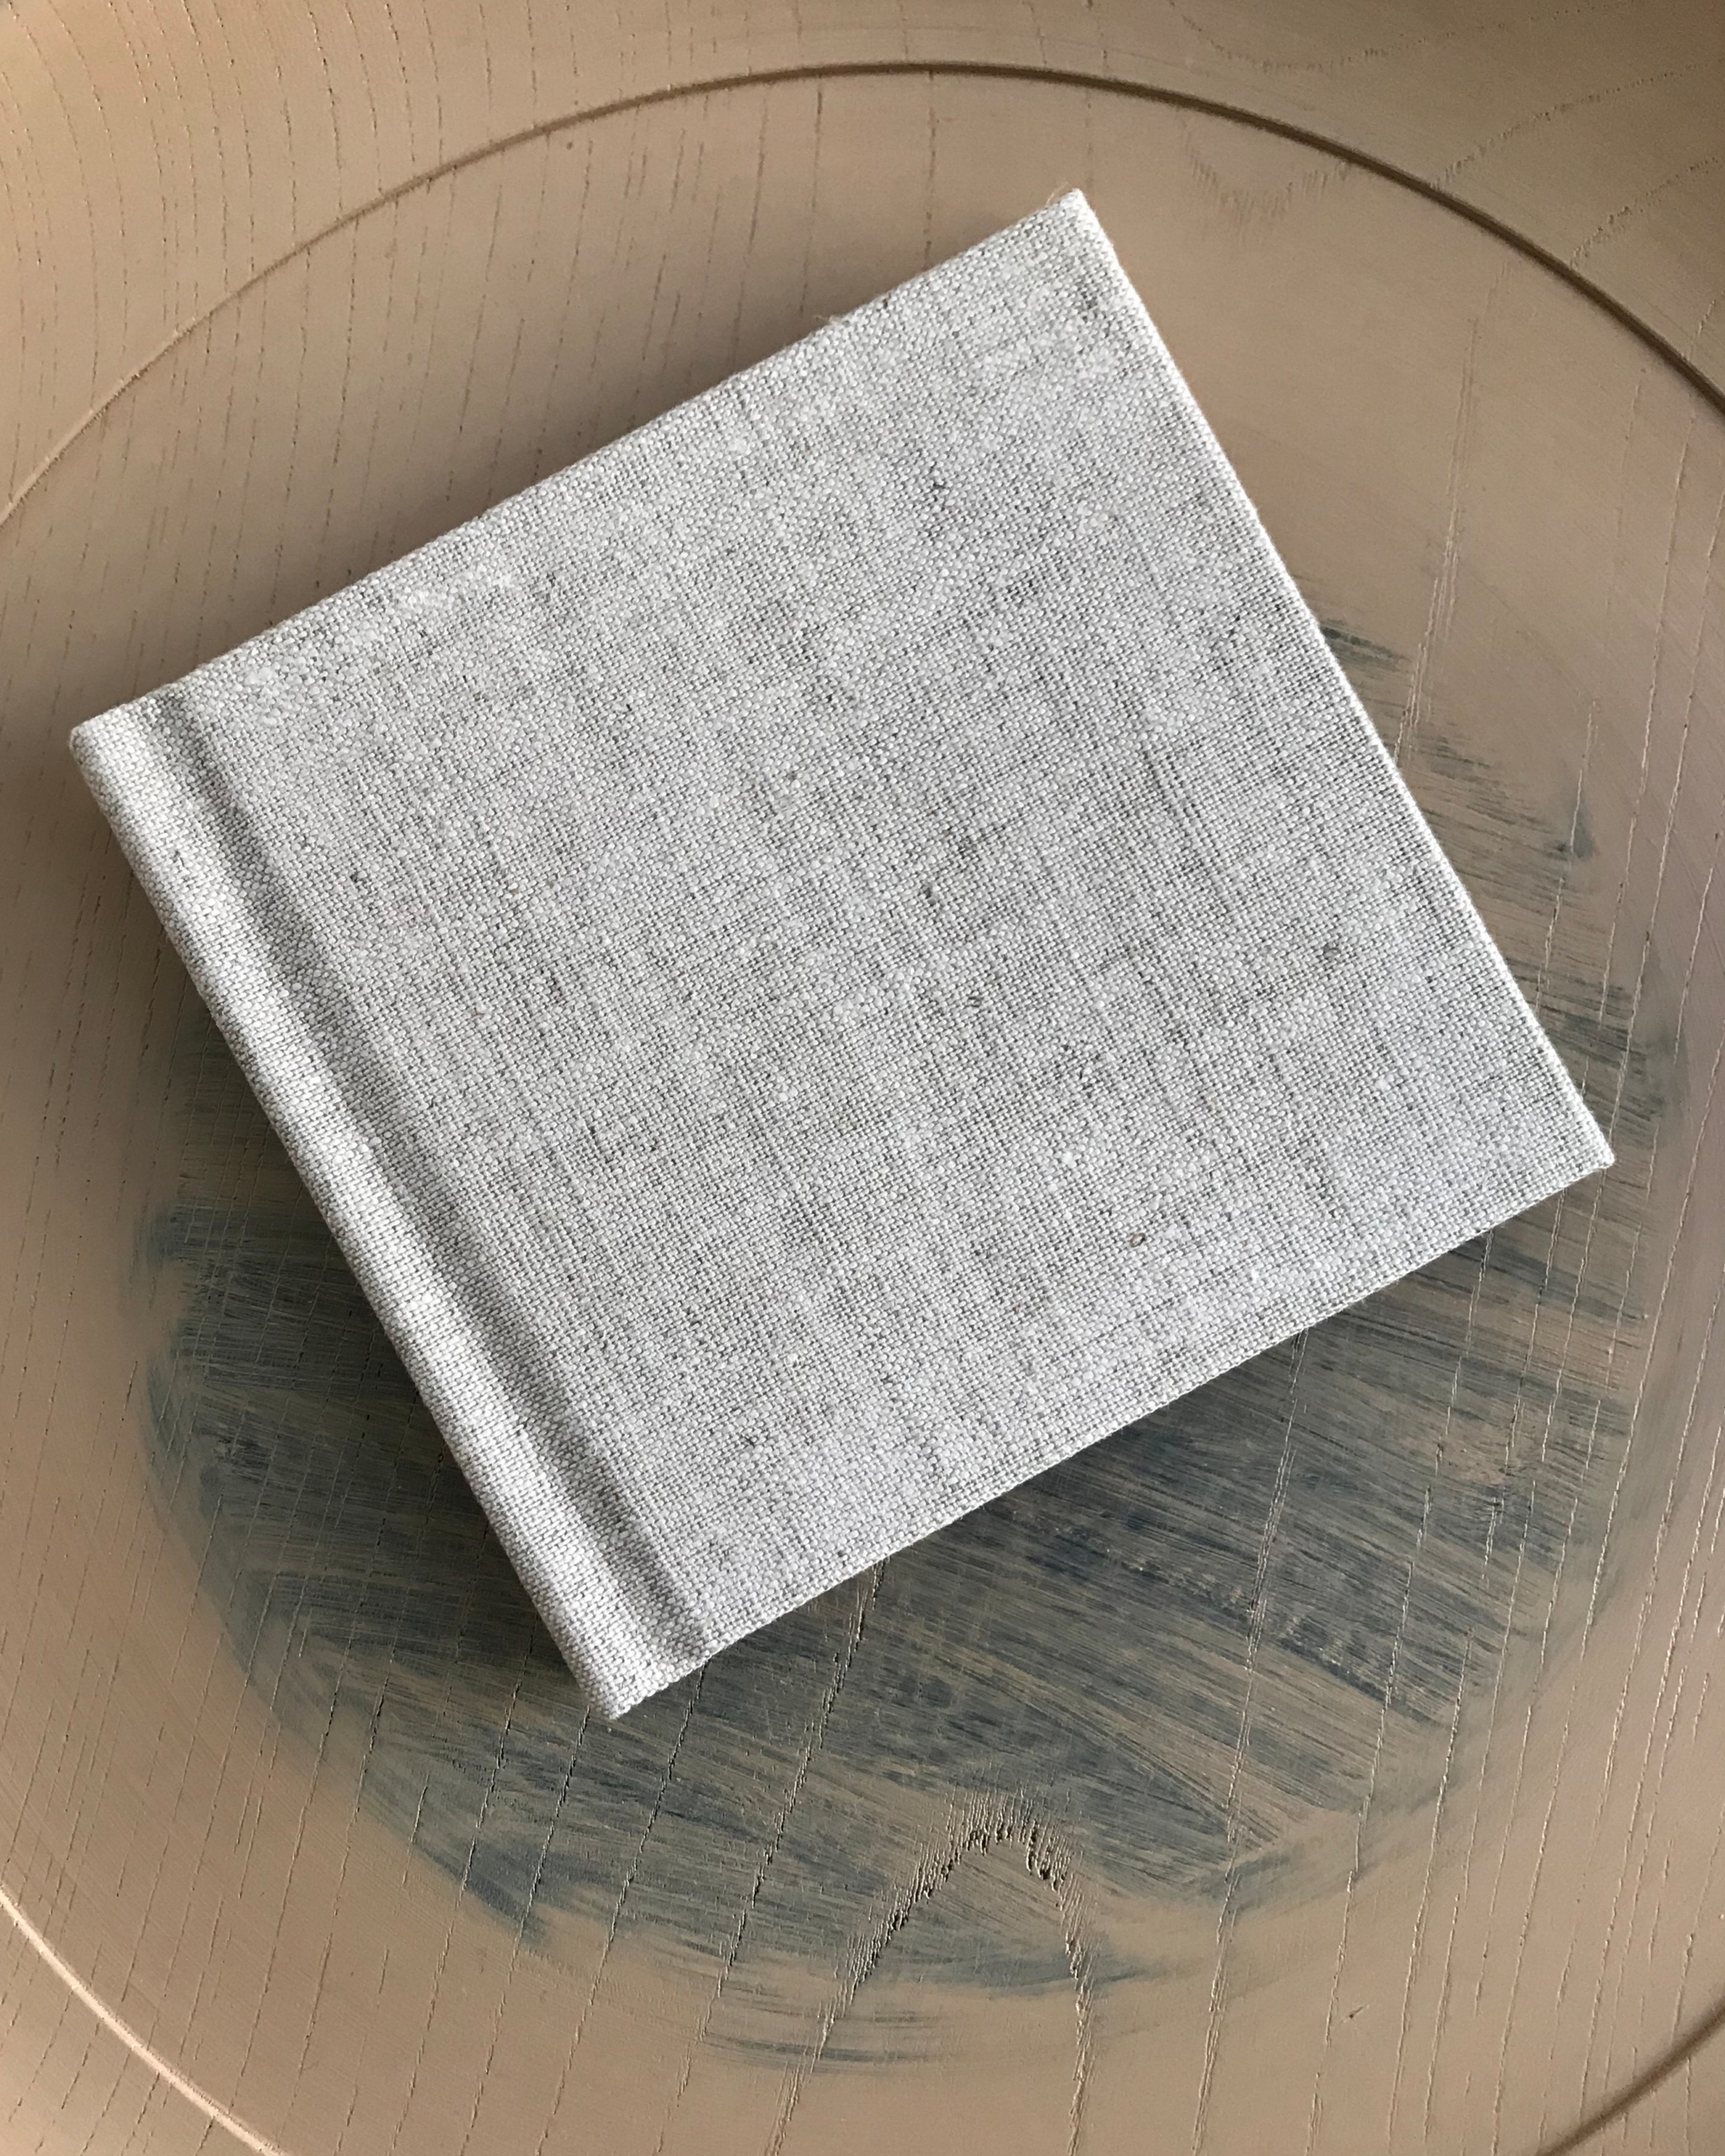 Small square linen covered guestbook for Ryuji Mitani